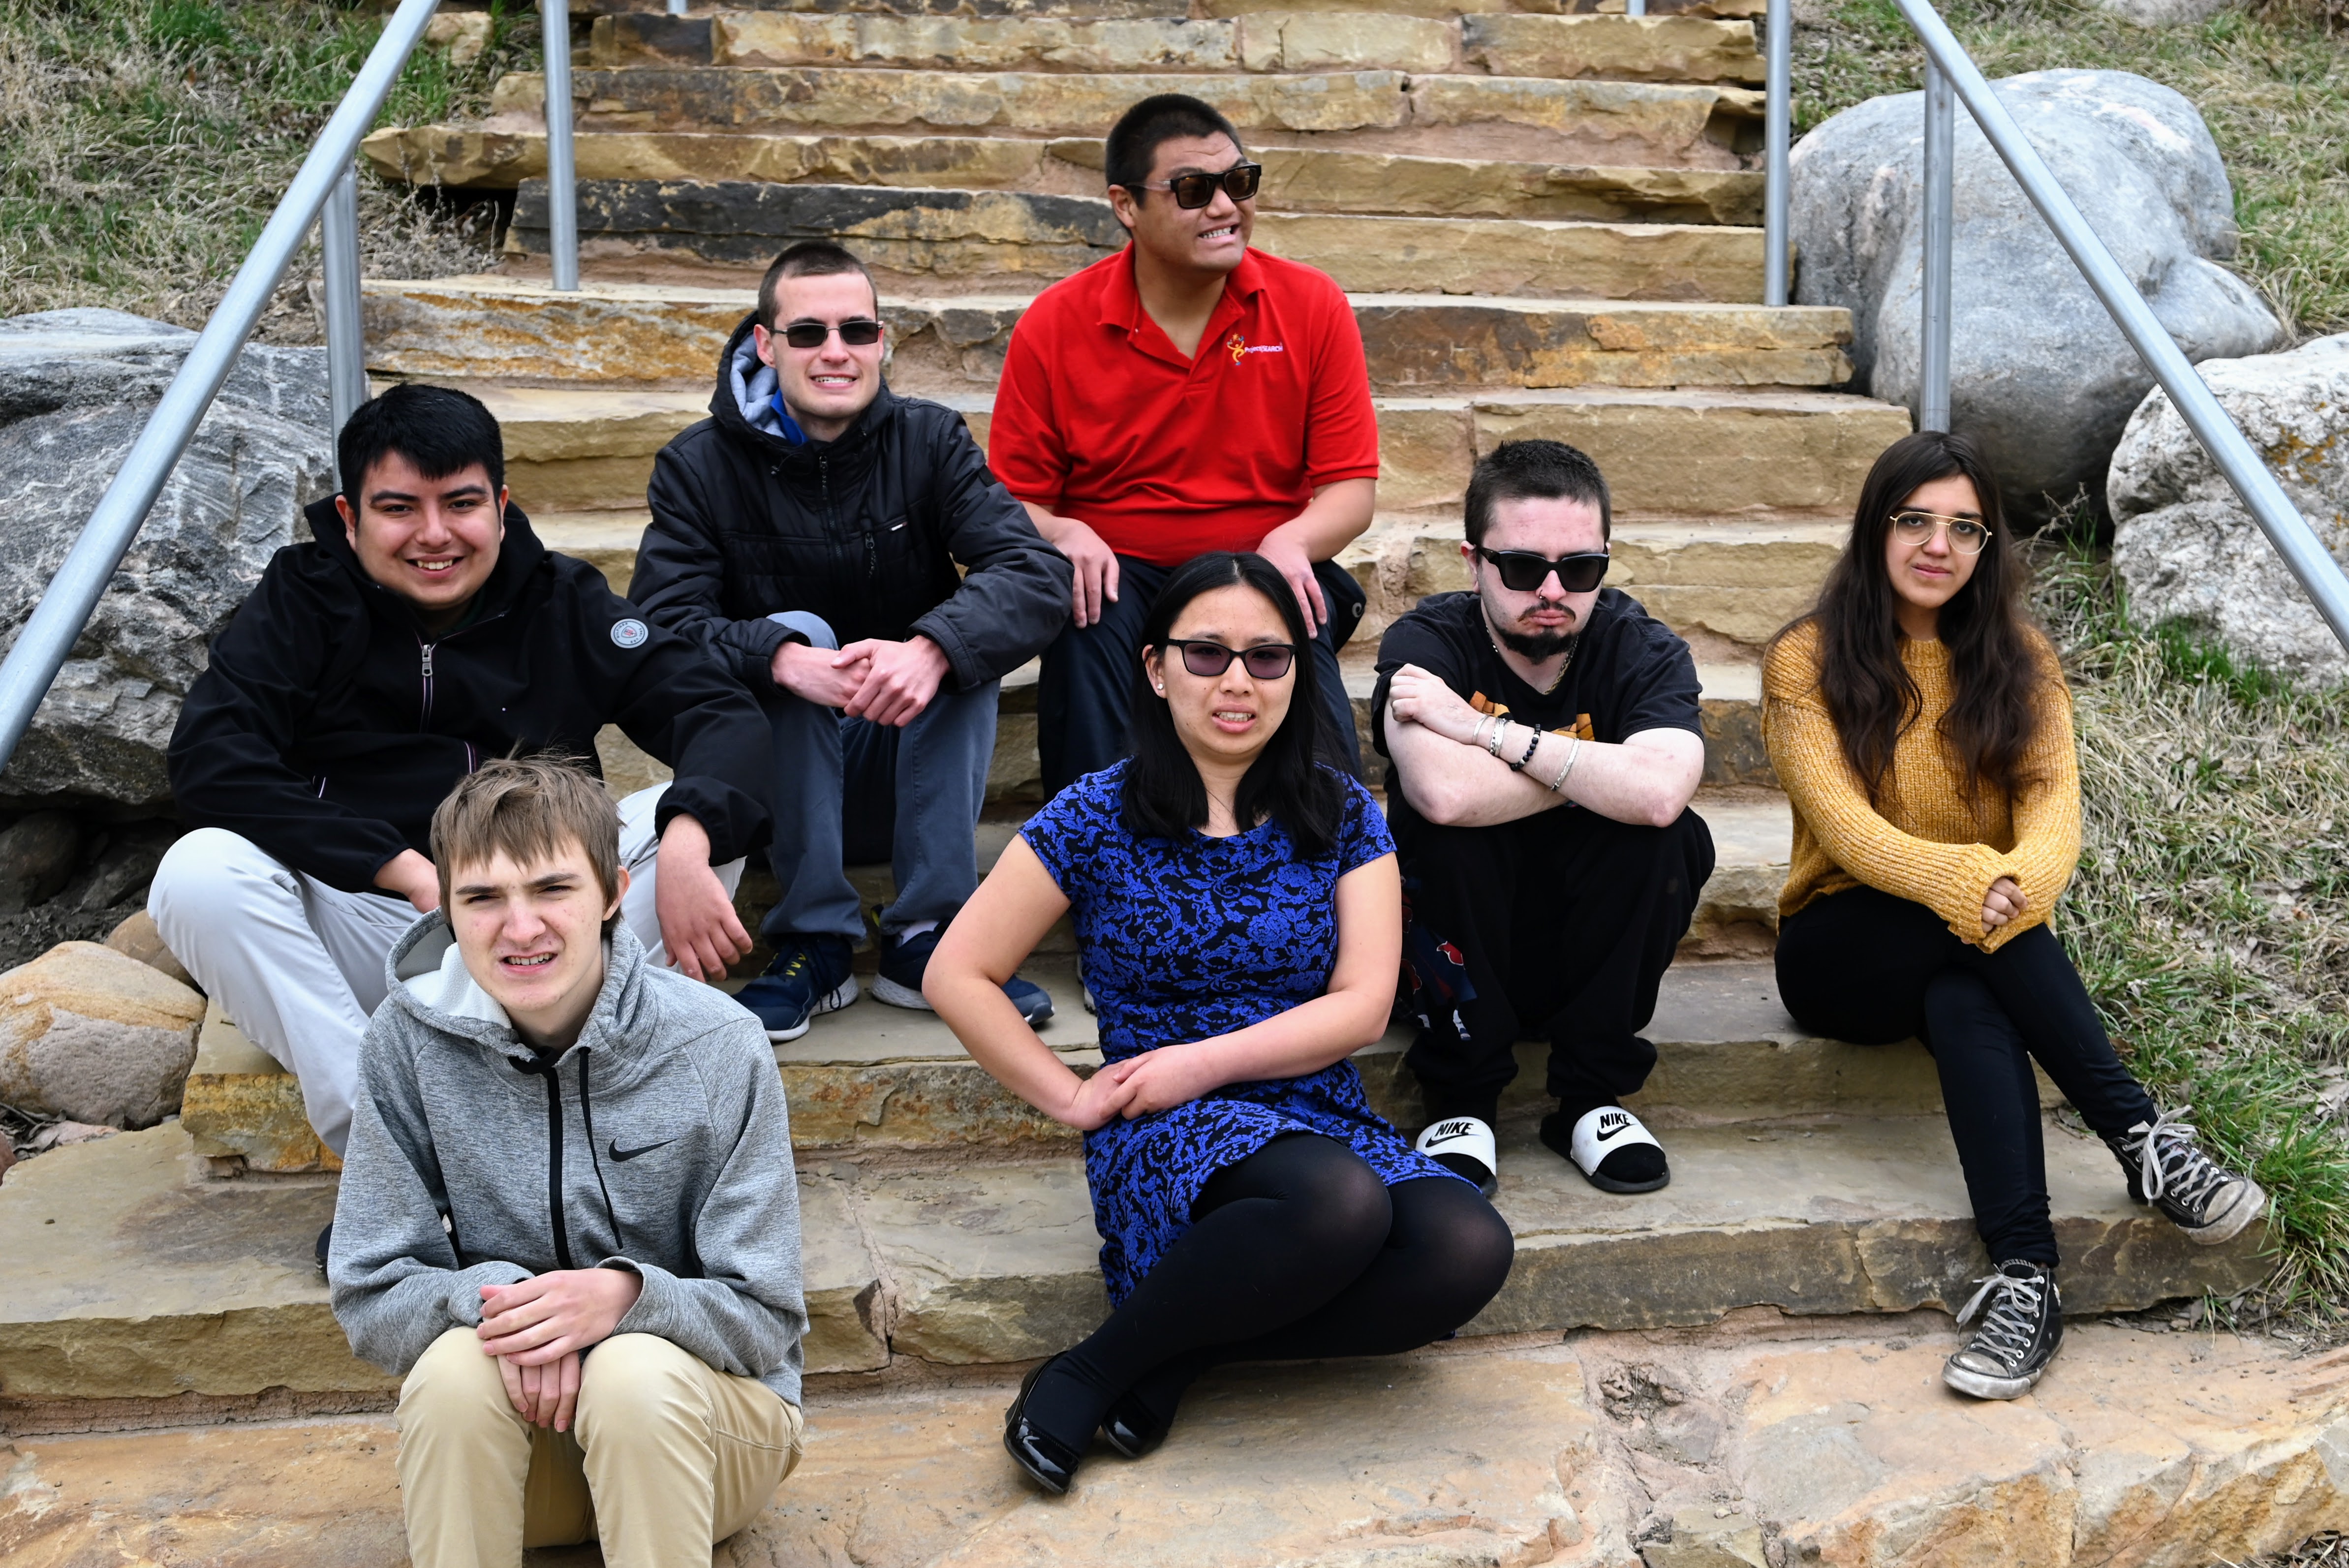 Project Search graduates sit outside on steps together.